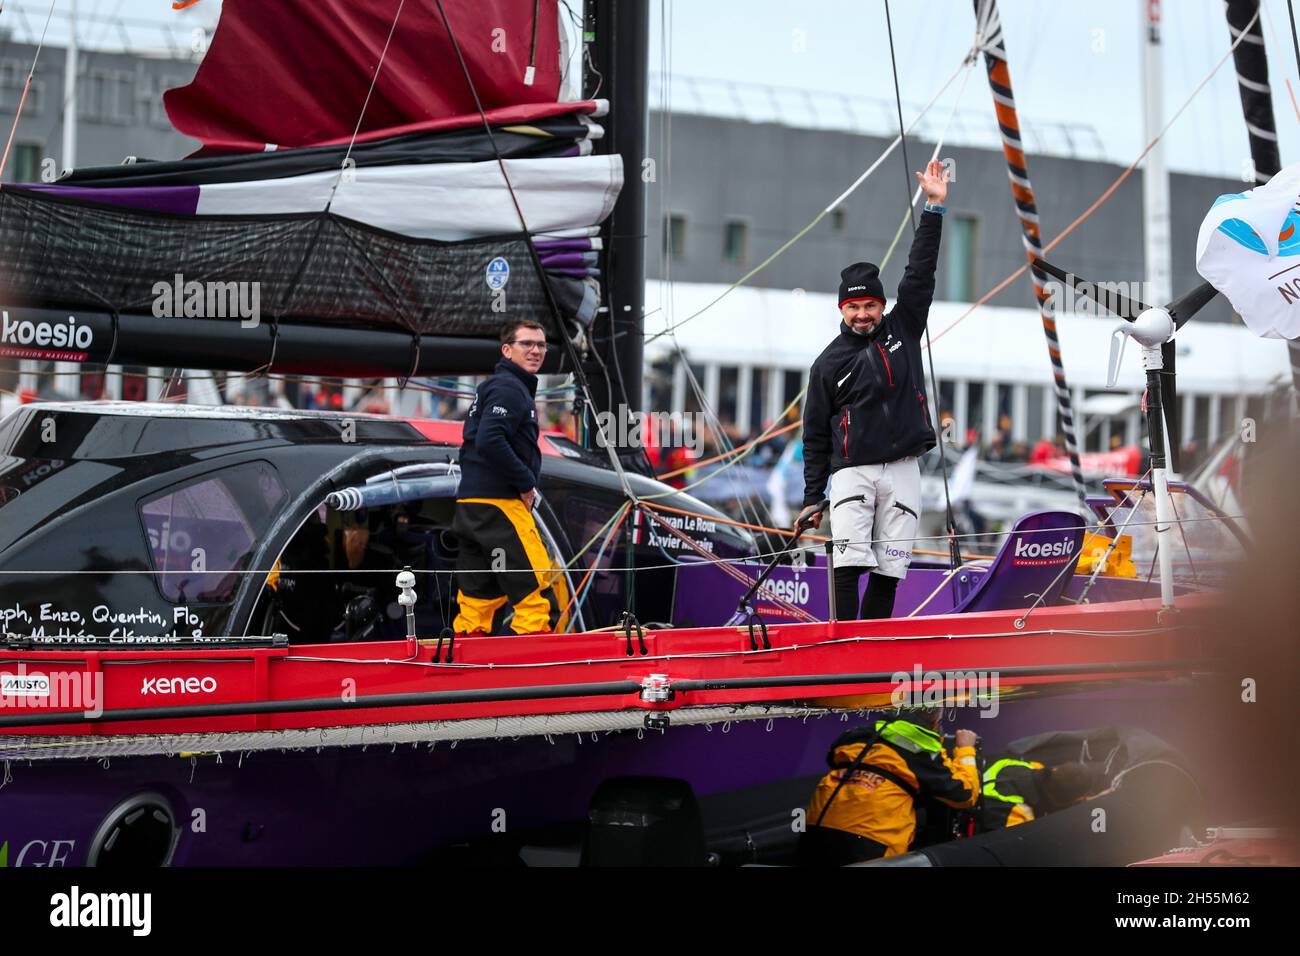 Le Havre, France. 07th Nov, 2021. Le Roux Erwan (fra) Macaire Xavier (fra) sailing on the Ocean Fifty Koesio prior to the start of the 15th edition of the Transat Jacques Vabre, yachting race from Le Havre, France to Fort de France, Martinique, on November 7, 2021 - Photo Pierre Bourras/DPPI Credit: DPPI Media/Alamy Live News Stock Photo